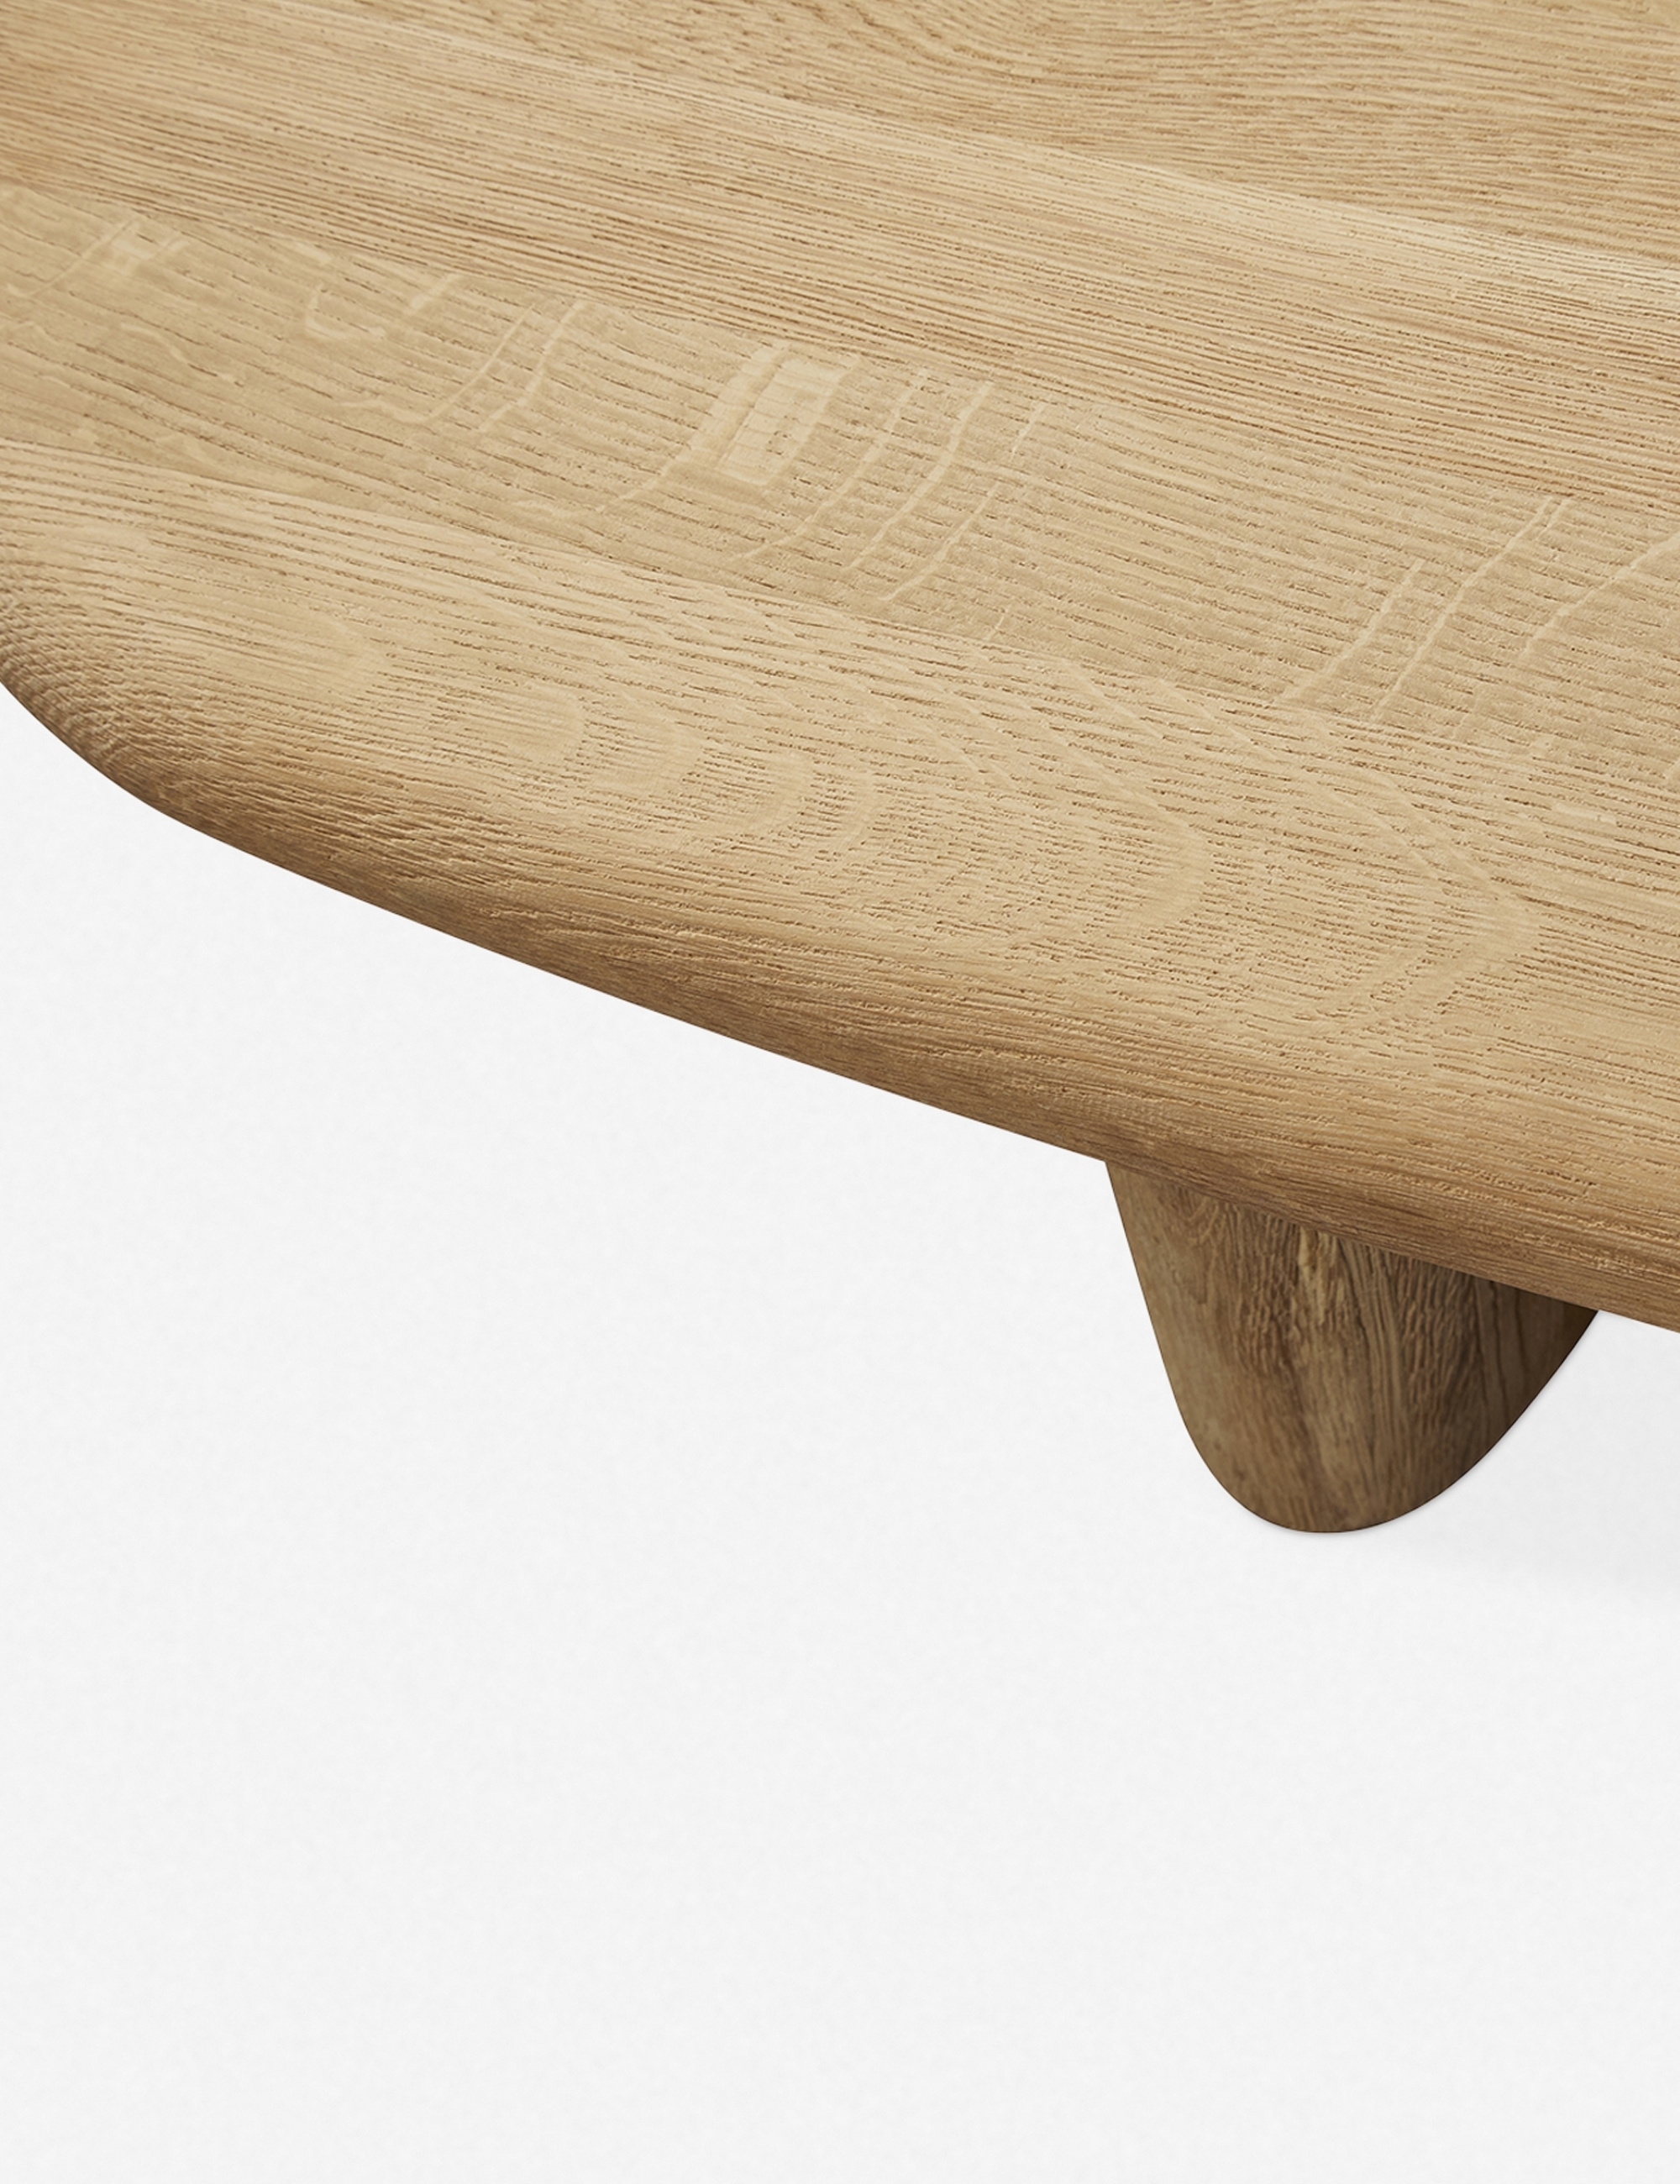 Nera Coffee Table, Natural - Image 4